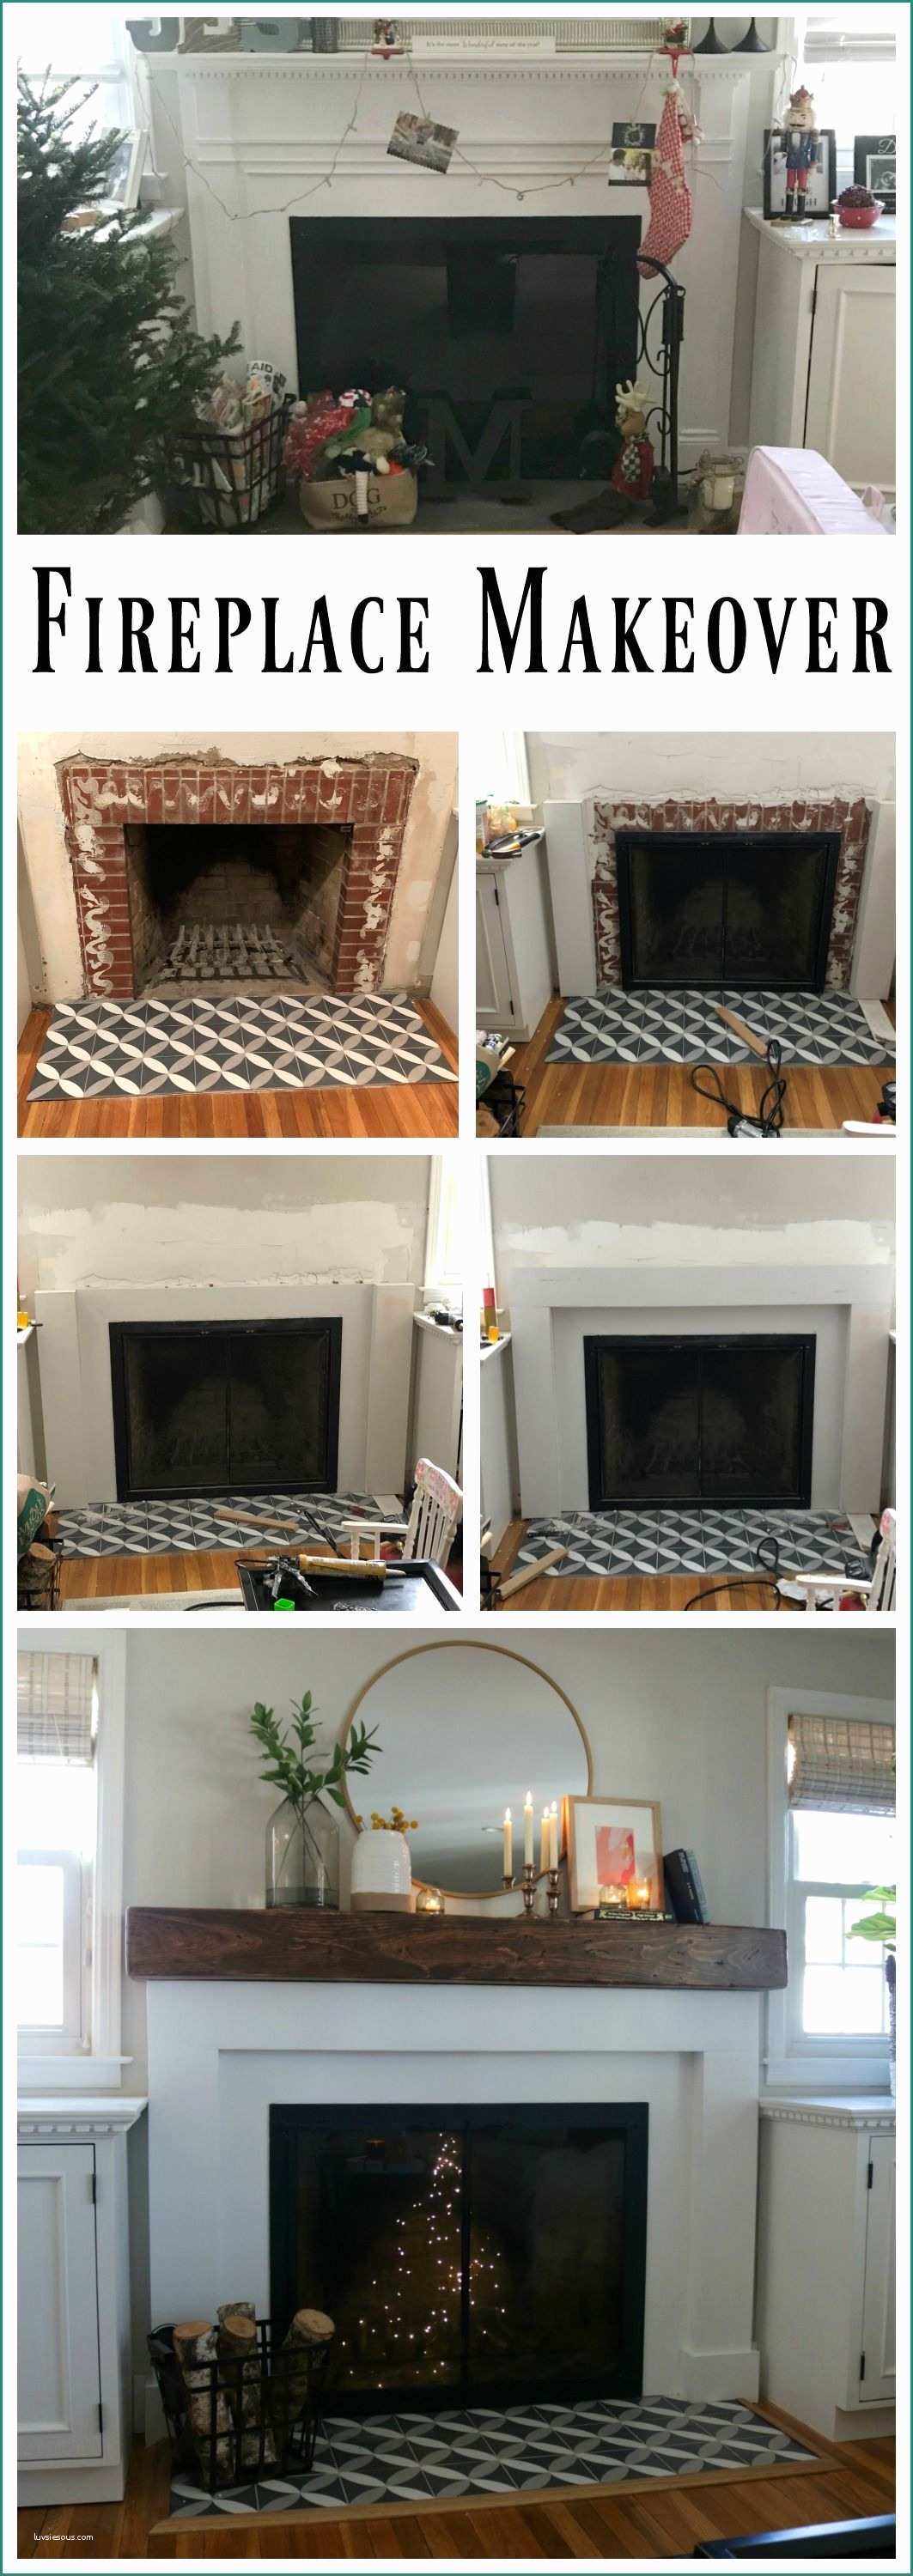 Soggiorno Con Camino E Fireplace Makeover and Styled with Decor From Tar